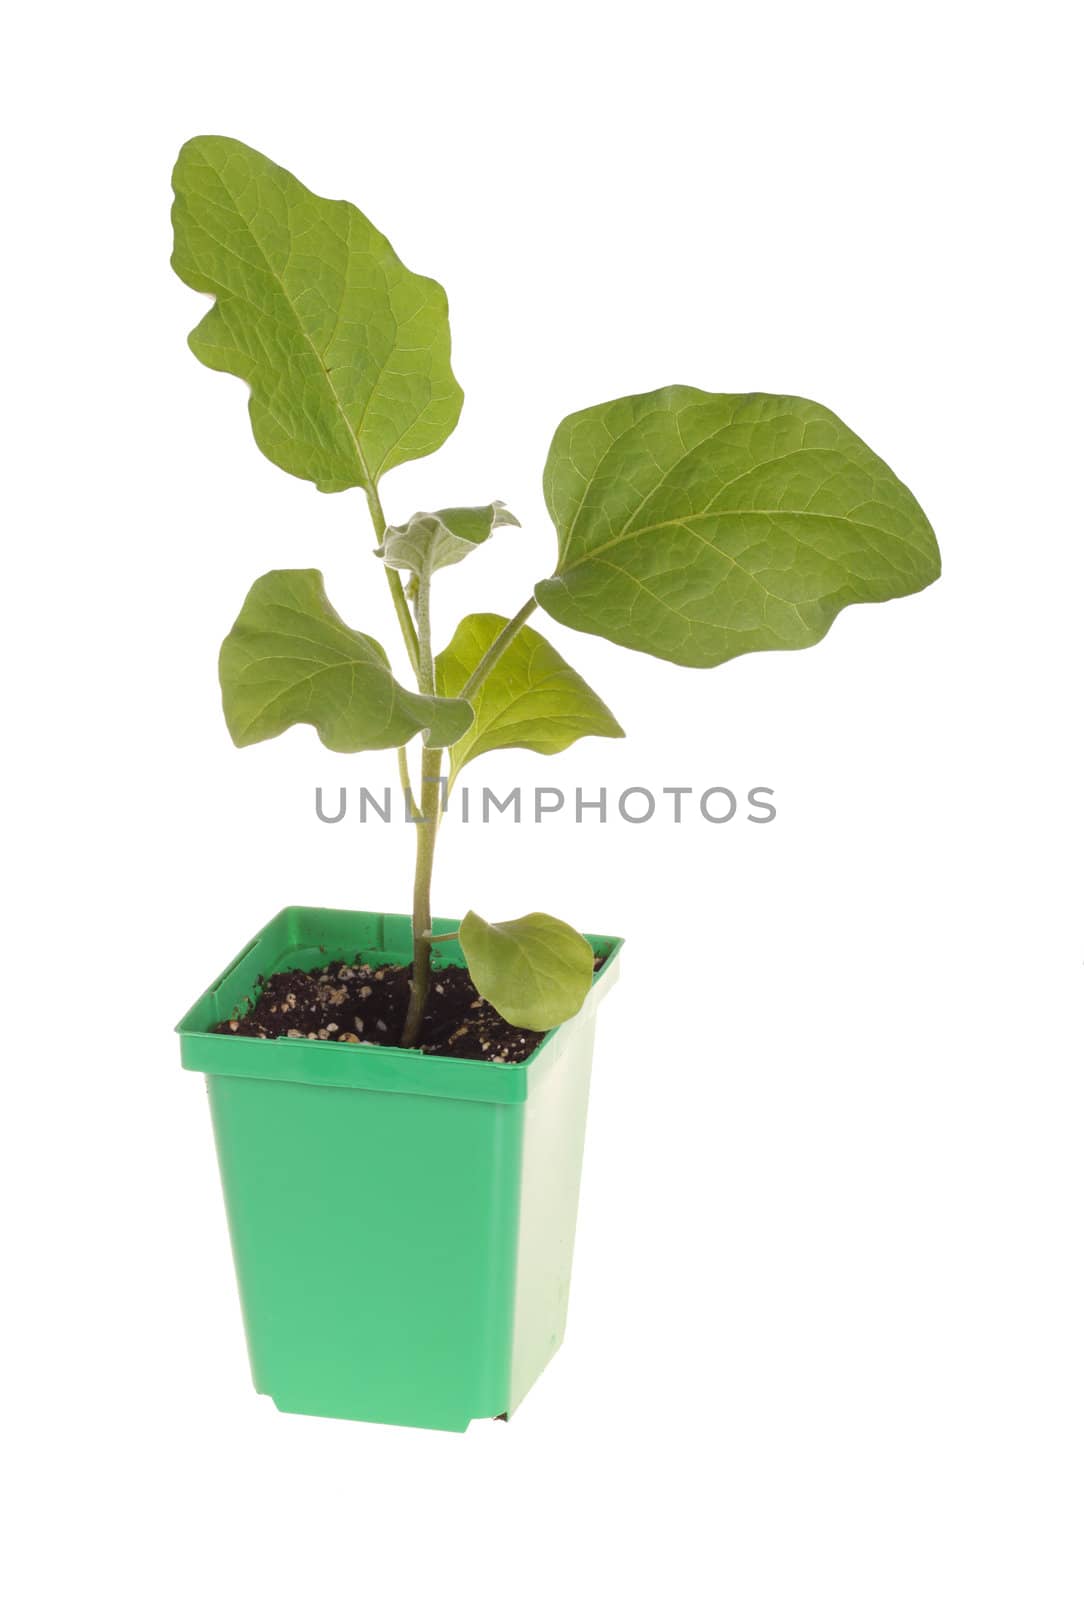 A single seedling of an eggplant (Solanum melongena) ready to be transplanted into a home garden isolated against a white background